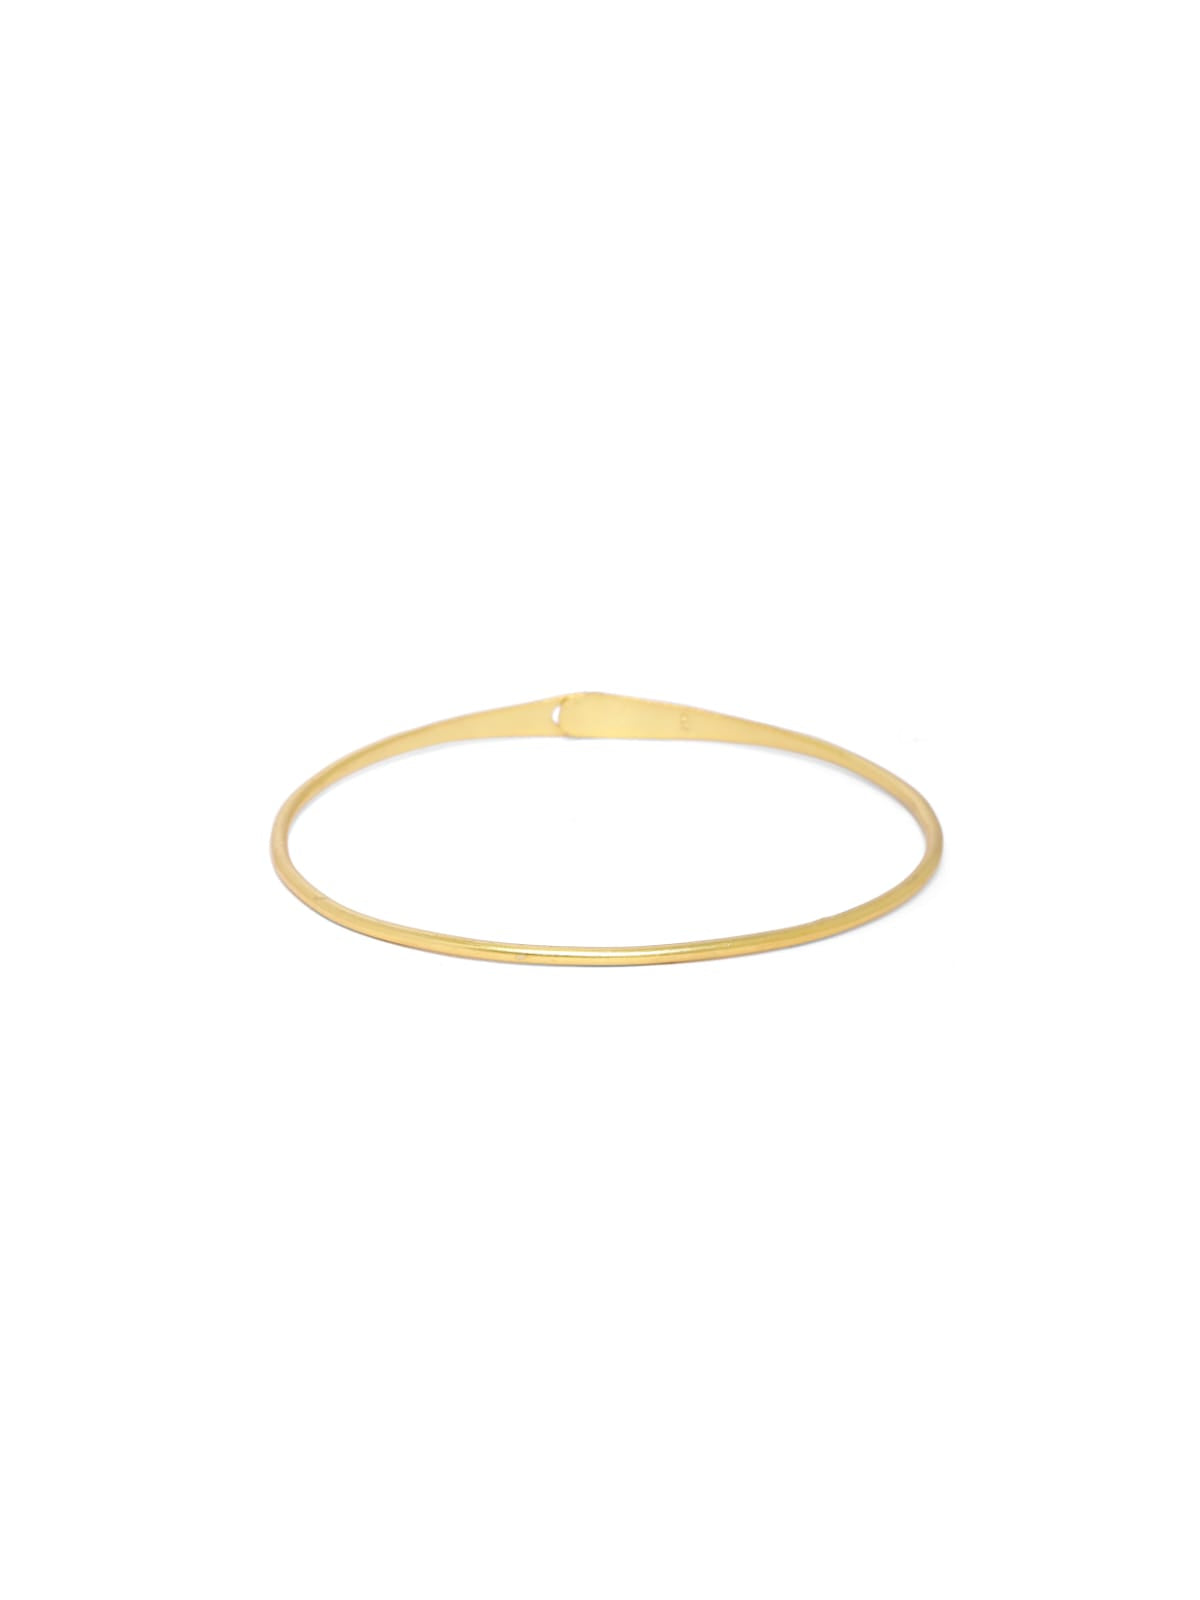 Unisex stackin hook bracelet in sterling silver with micron Gold plating.